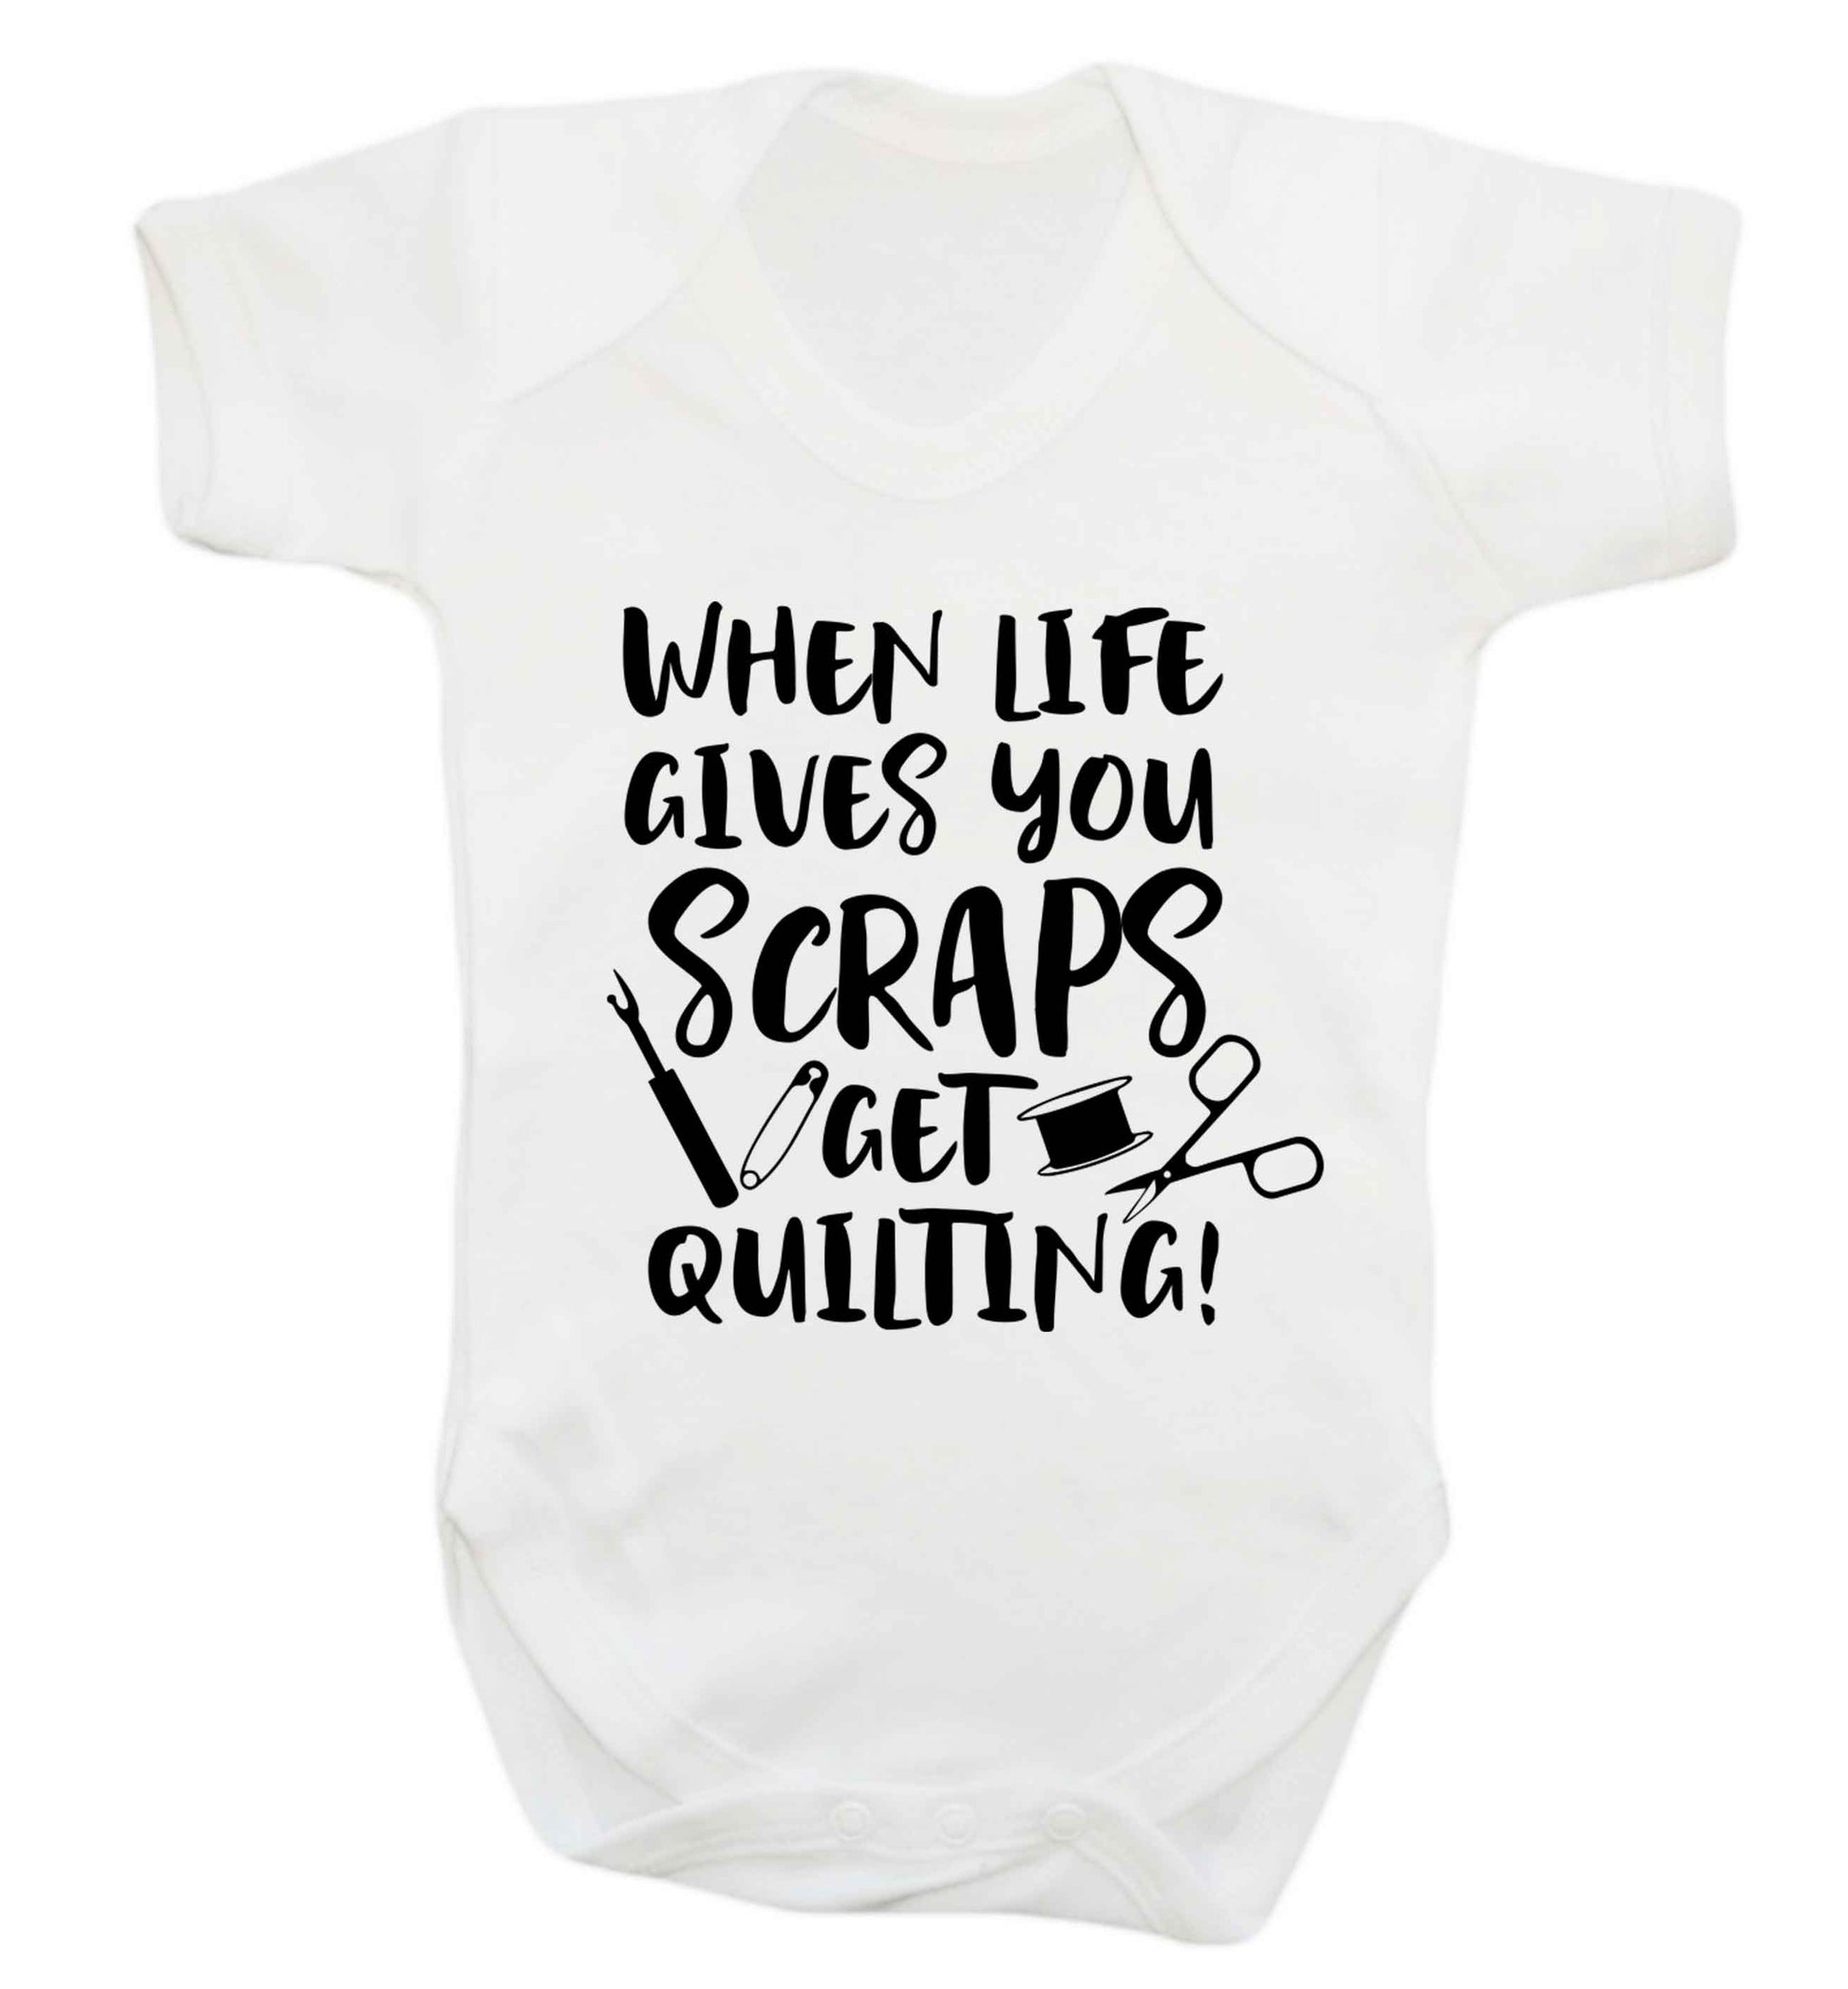 When life gives you scraps get quilting! Baby Vest white 18-24 months